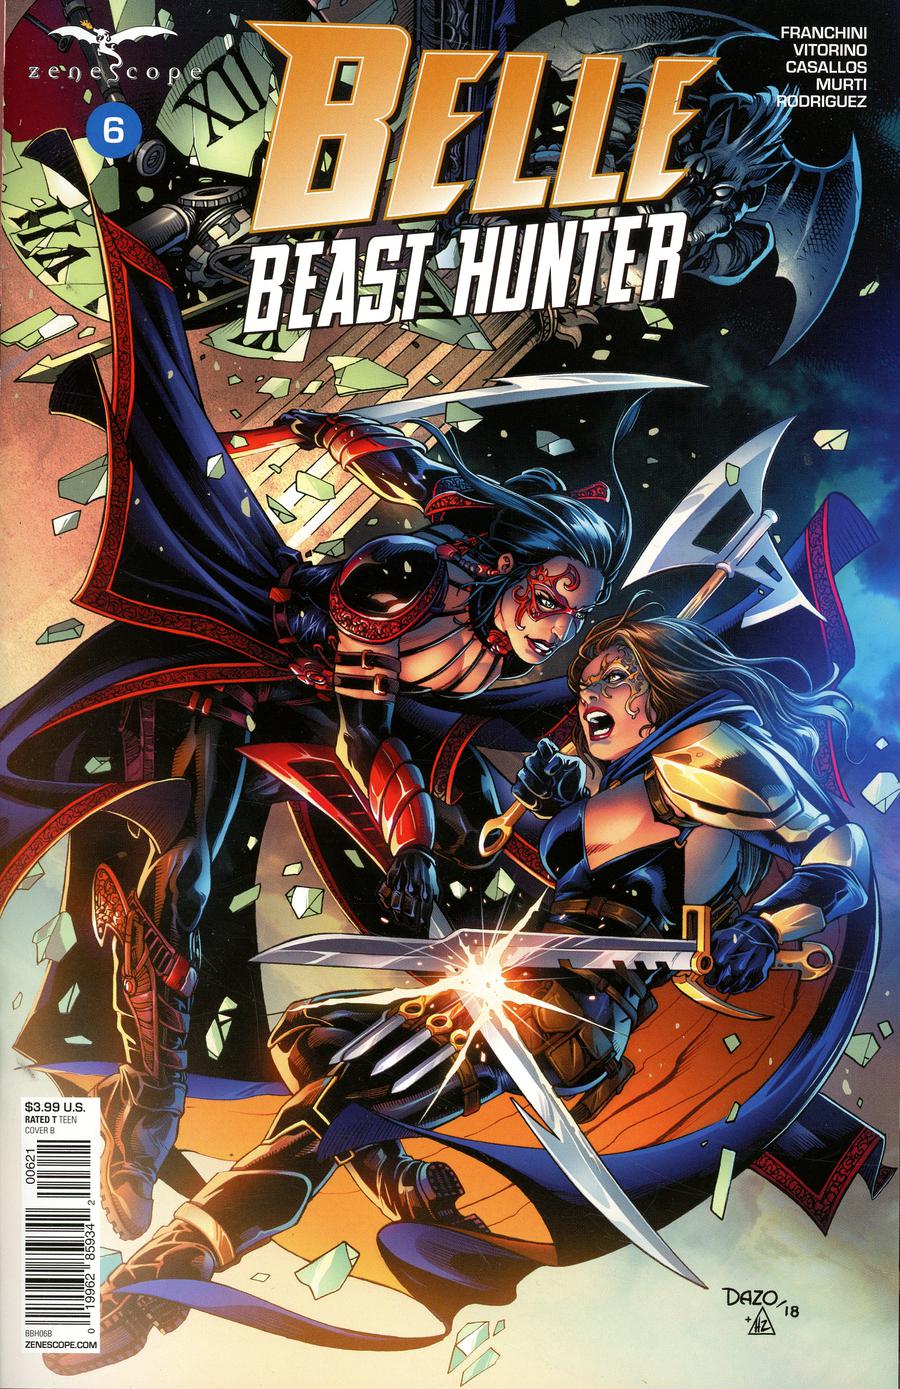 Grimm Fairy Tales Presents Belle Beast Hunter #6 Cover B Bong Dazo